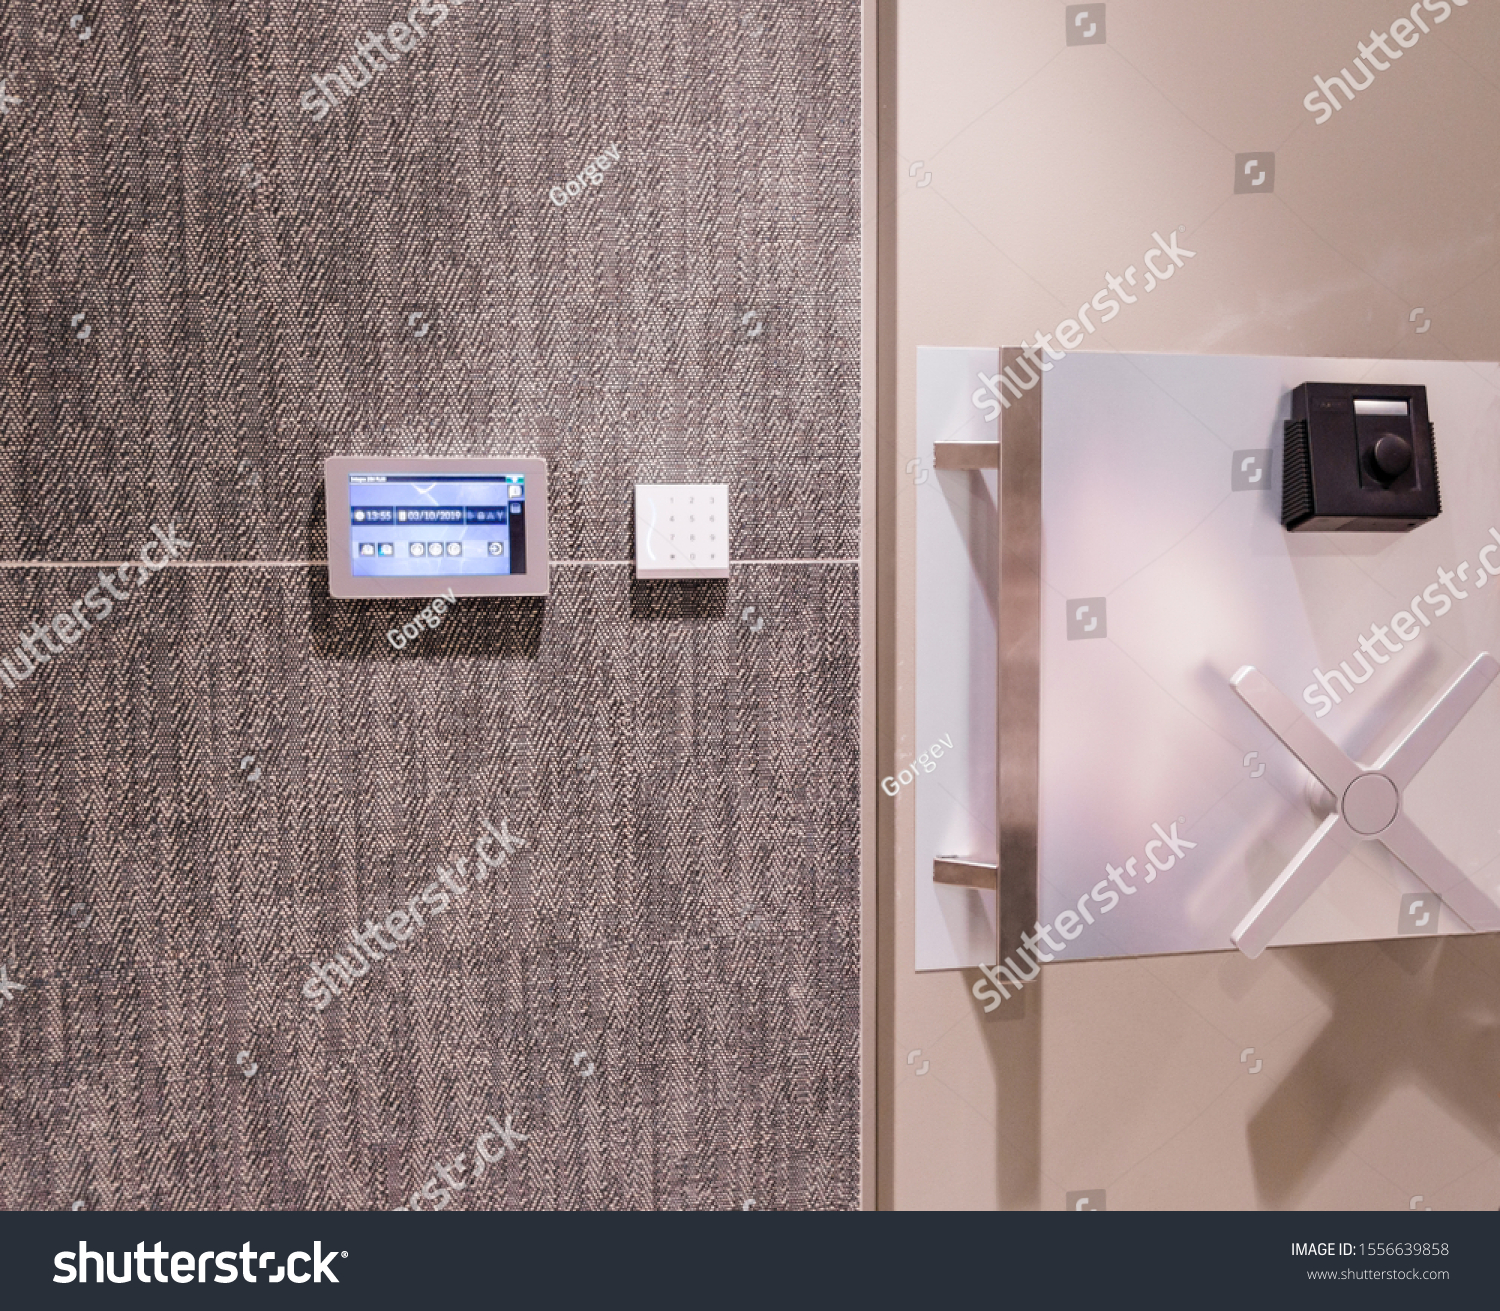 Security woman in uniform standing infront of safe door with keypad and touchscreen #1556639858